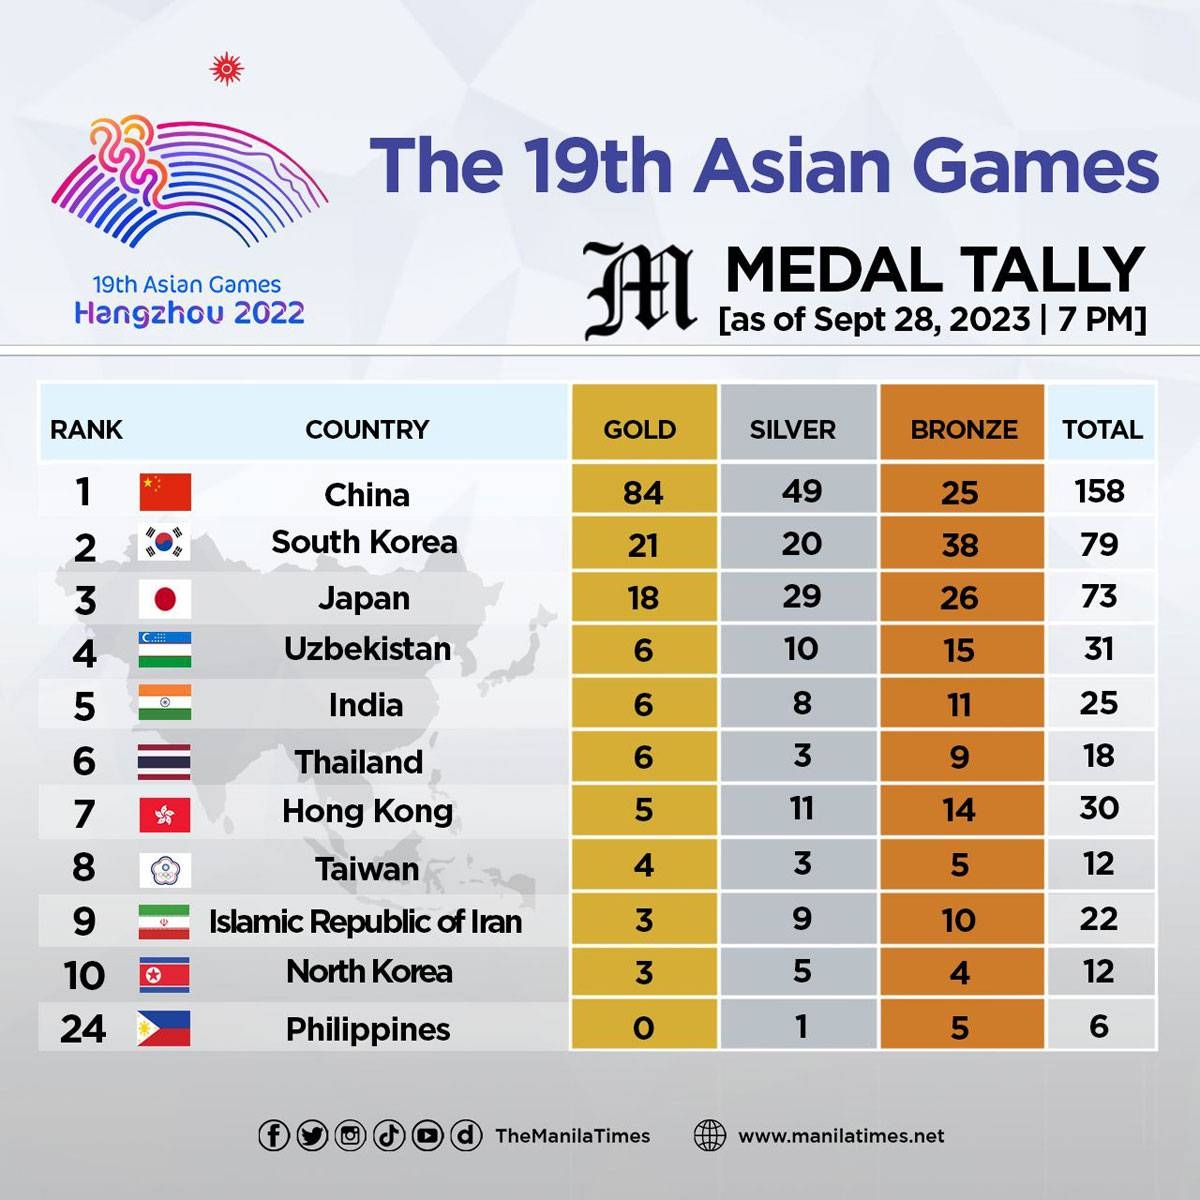 The 19th Asian Games medal tally as of Sept. 28, 2023 0700 PM The